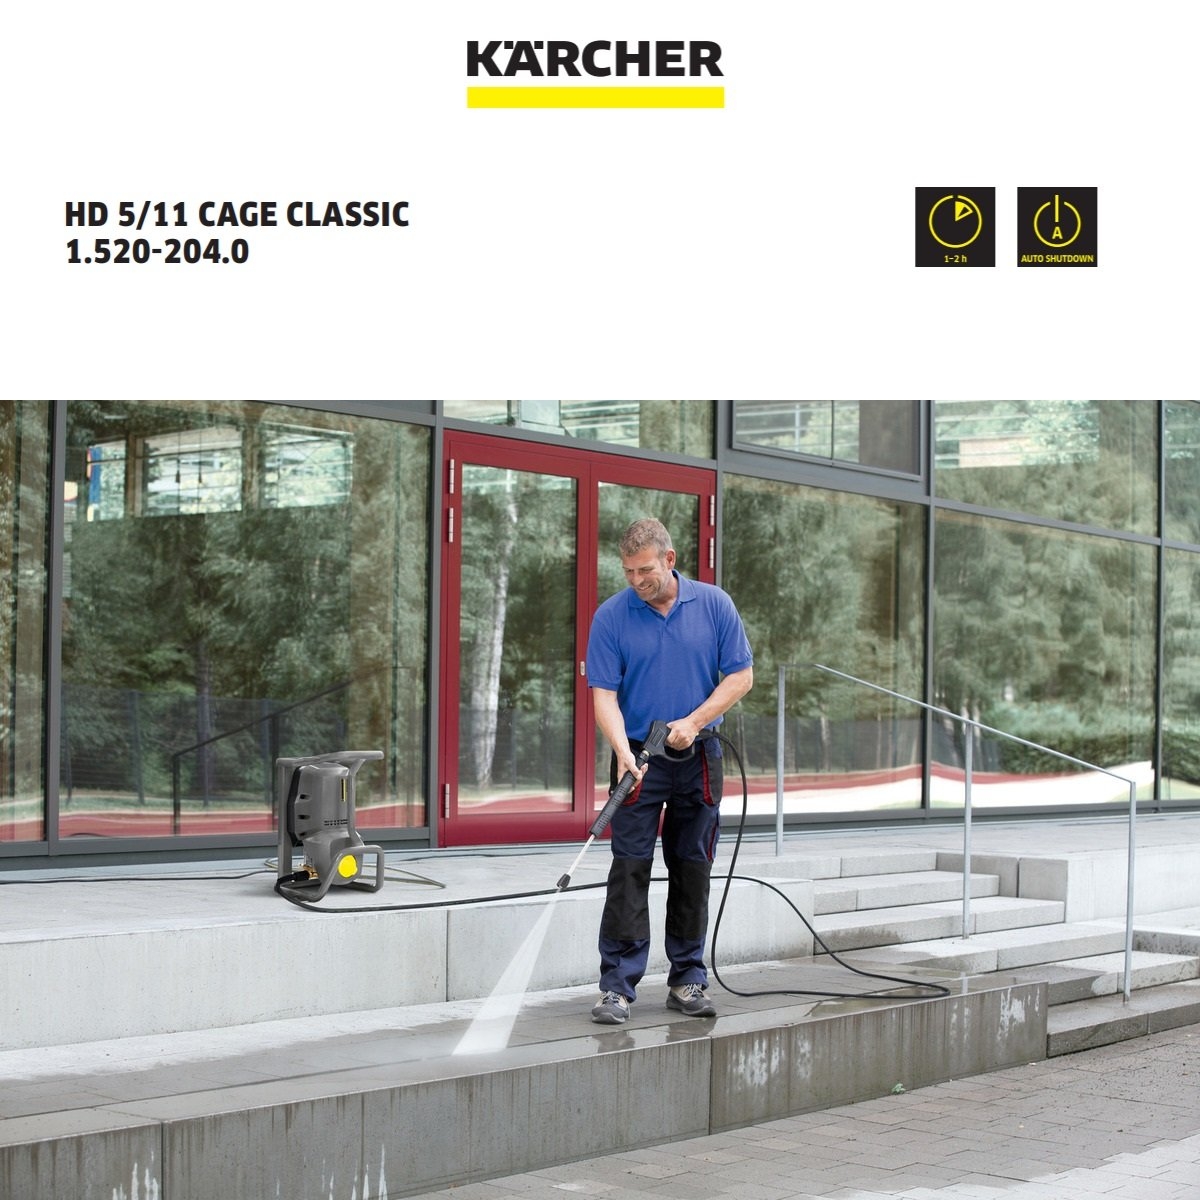 HIGH PRESSURE Professional Cage Karcher KARCHER Cleaner Cleaning High-Pressure Classic WASHER Professional 5/11 HD